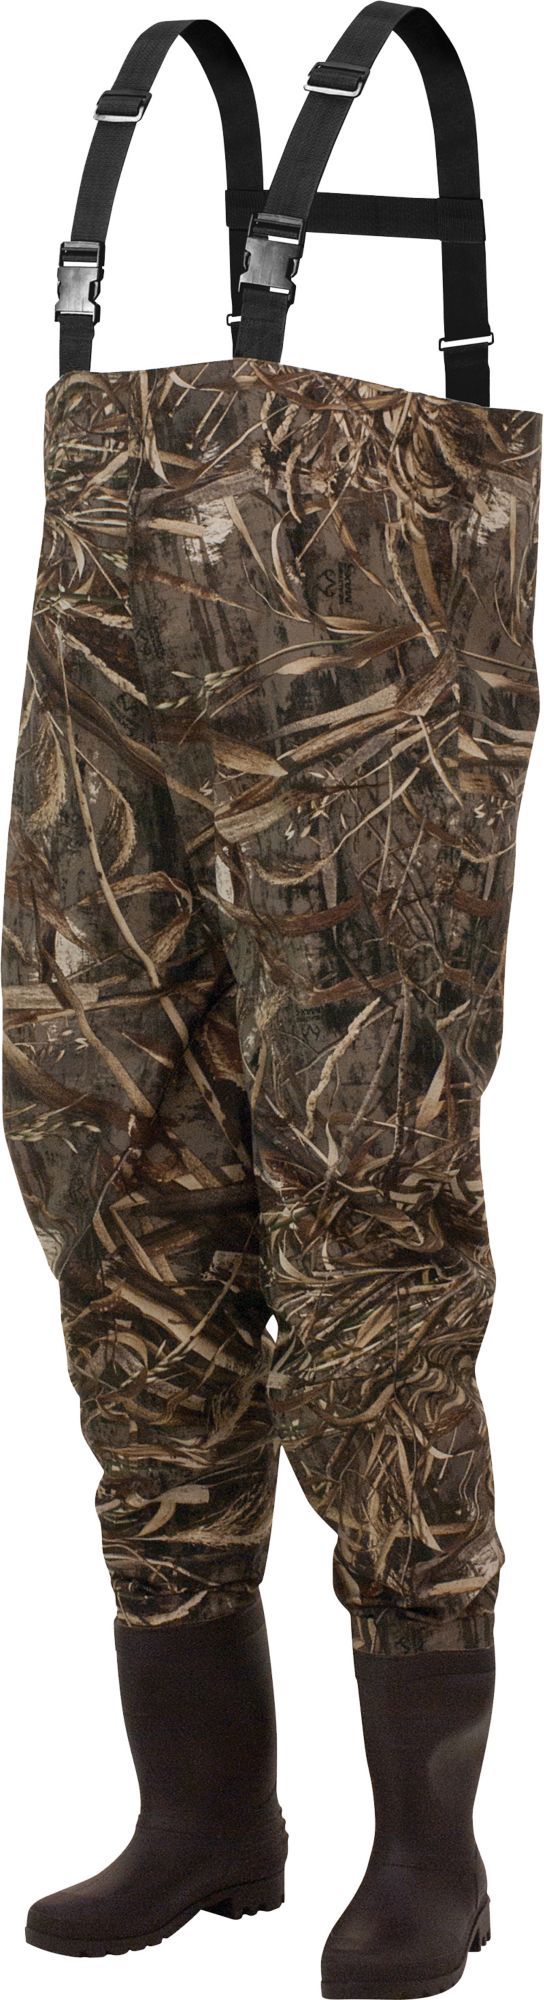 frogg toggs Rana II Camouflage Chest Waders, Men's, Size 10, Max-5